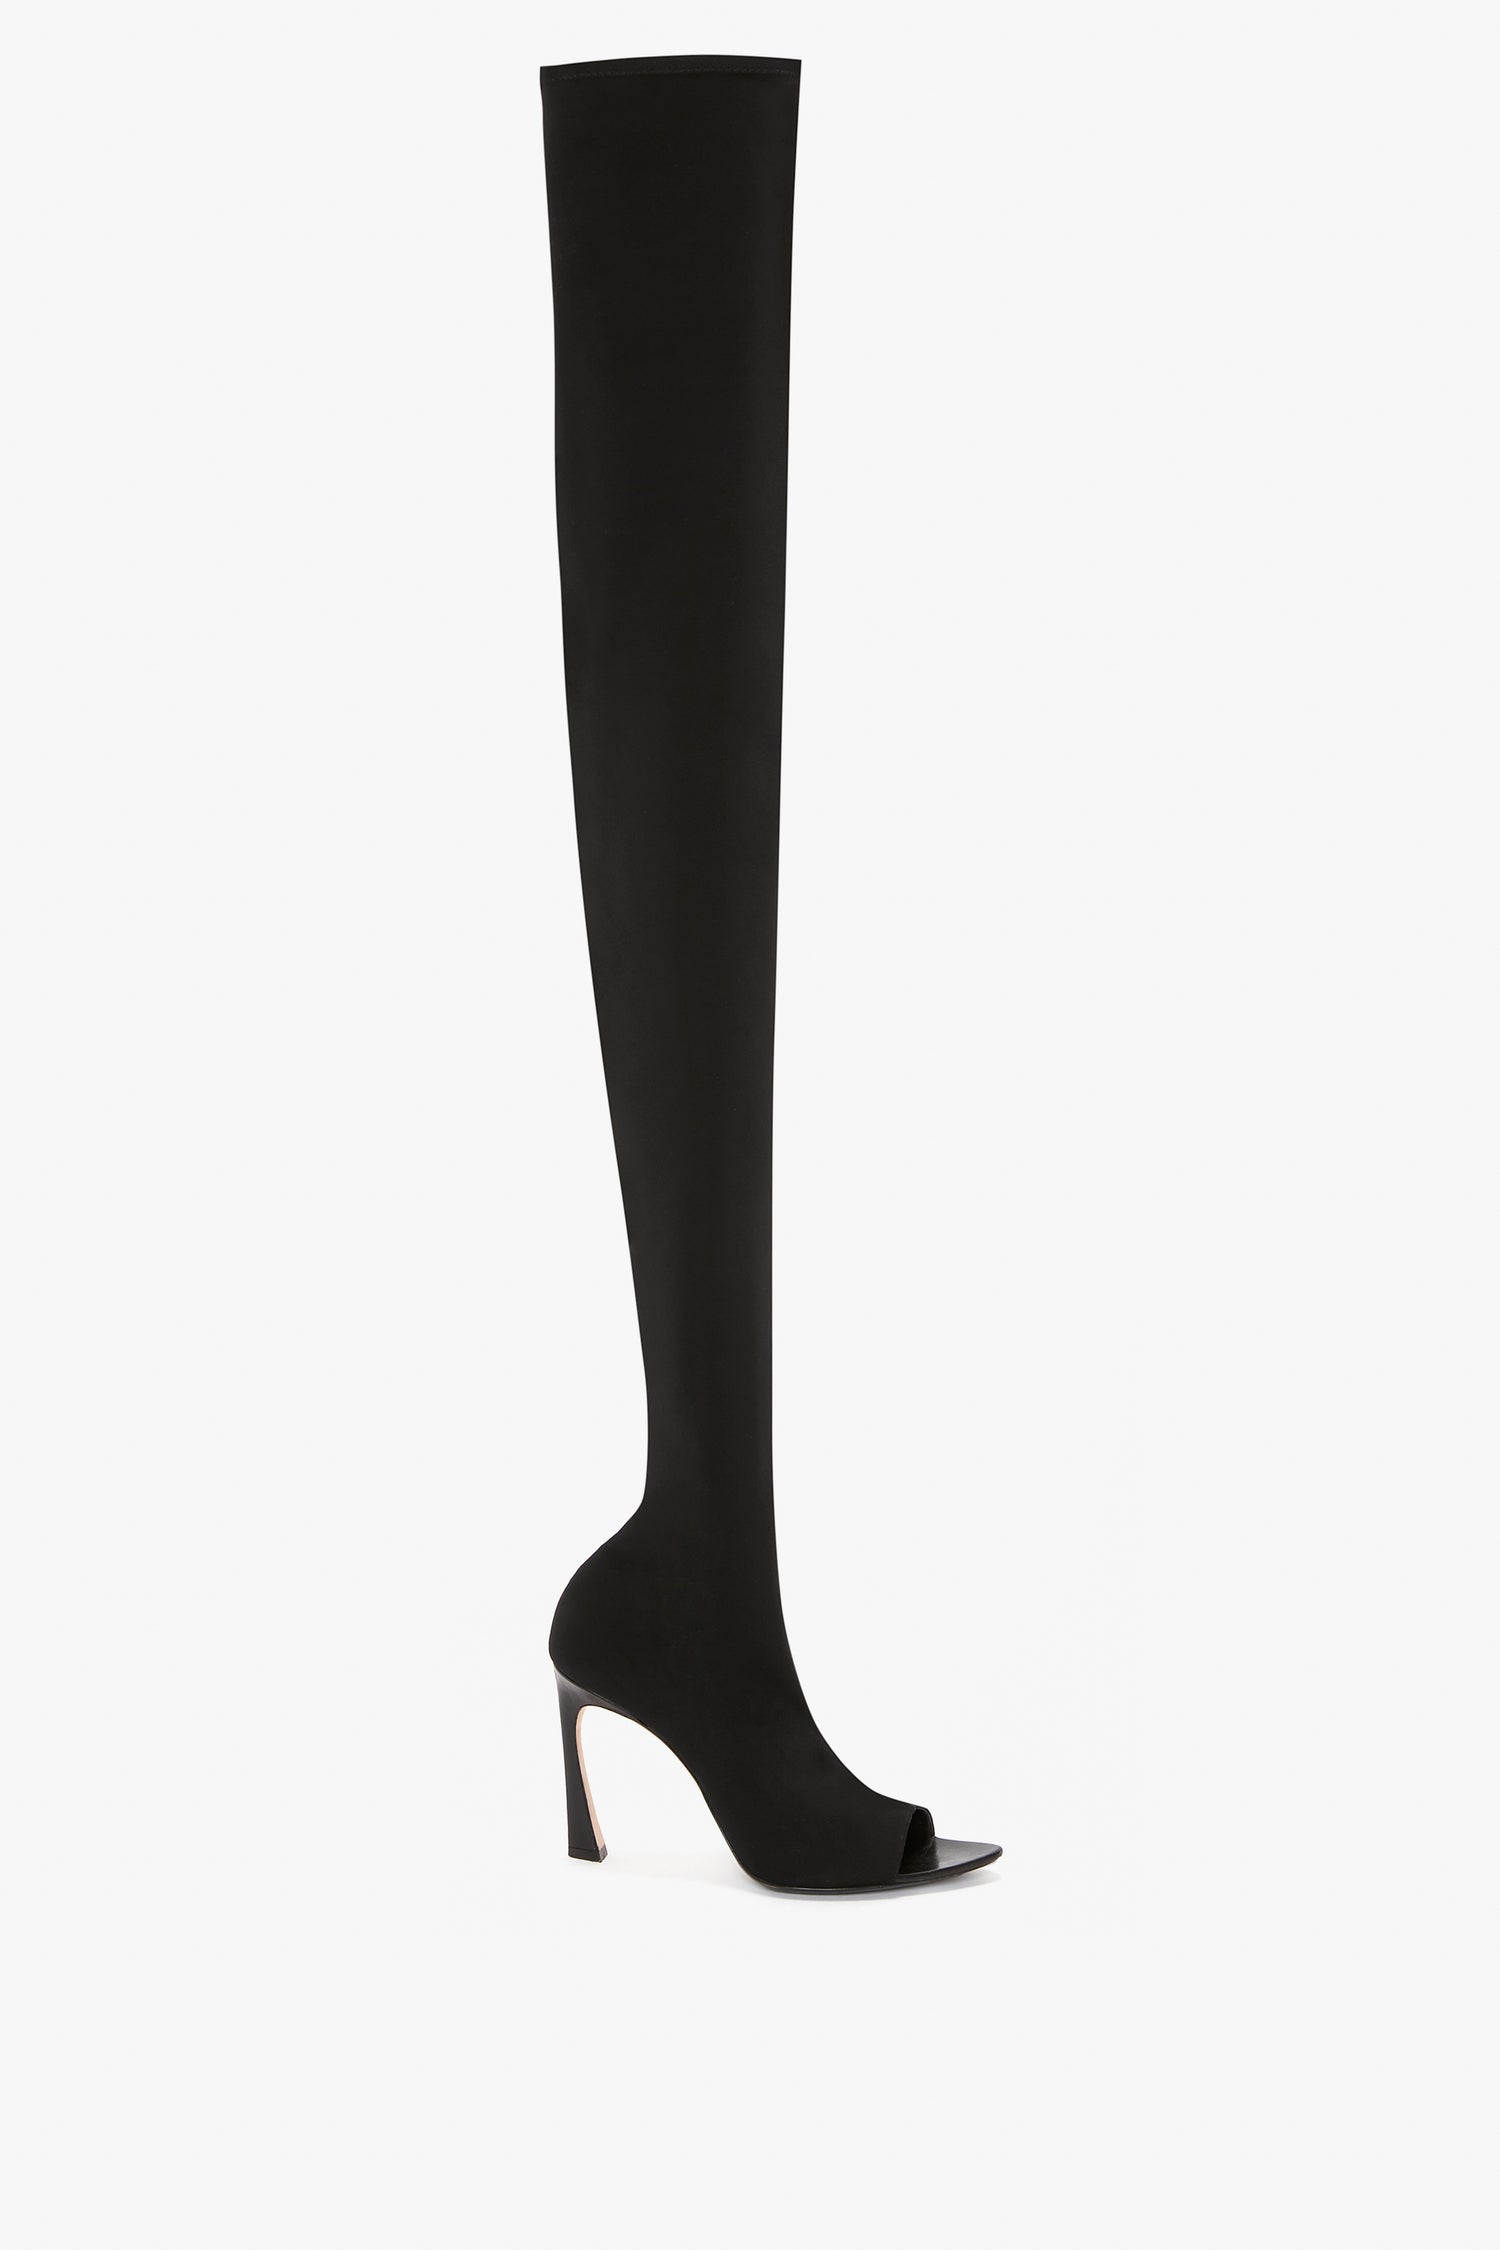 Black, thigh-high stiletto boot with an open toe design and high heel, viewed from the side against a plain white background. This sophisticated Peep Toe Stretch Jersey Boot In Black exudes elegance and style, reminiscent of Victoria Beckham footwear.